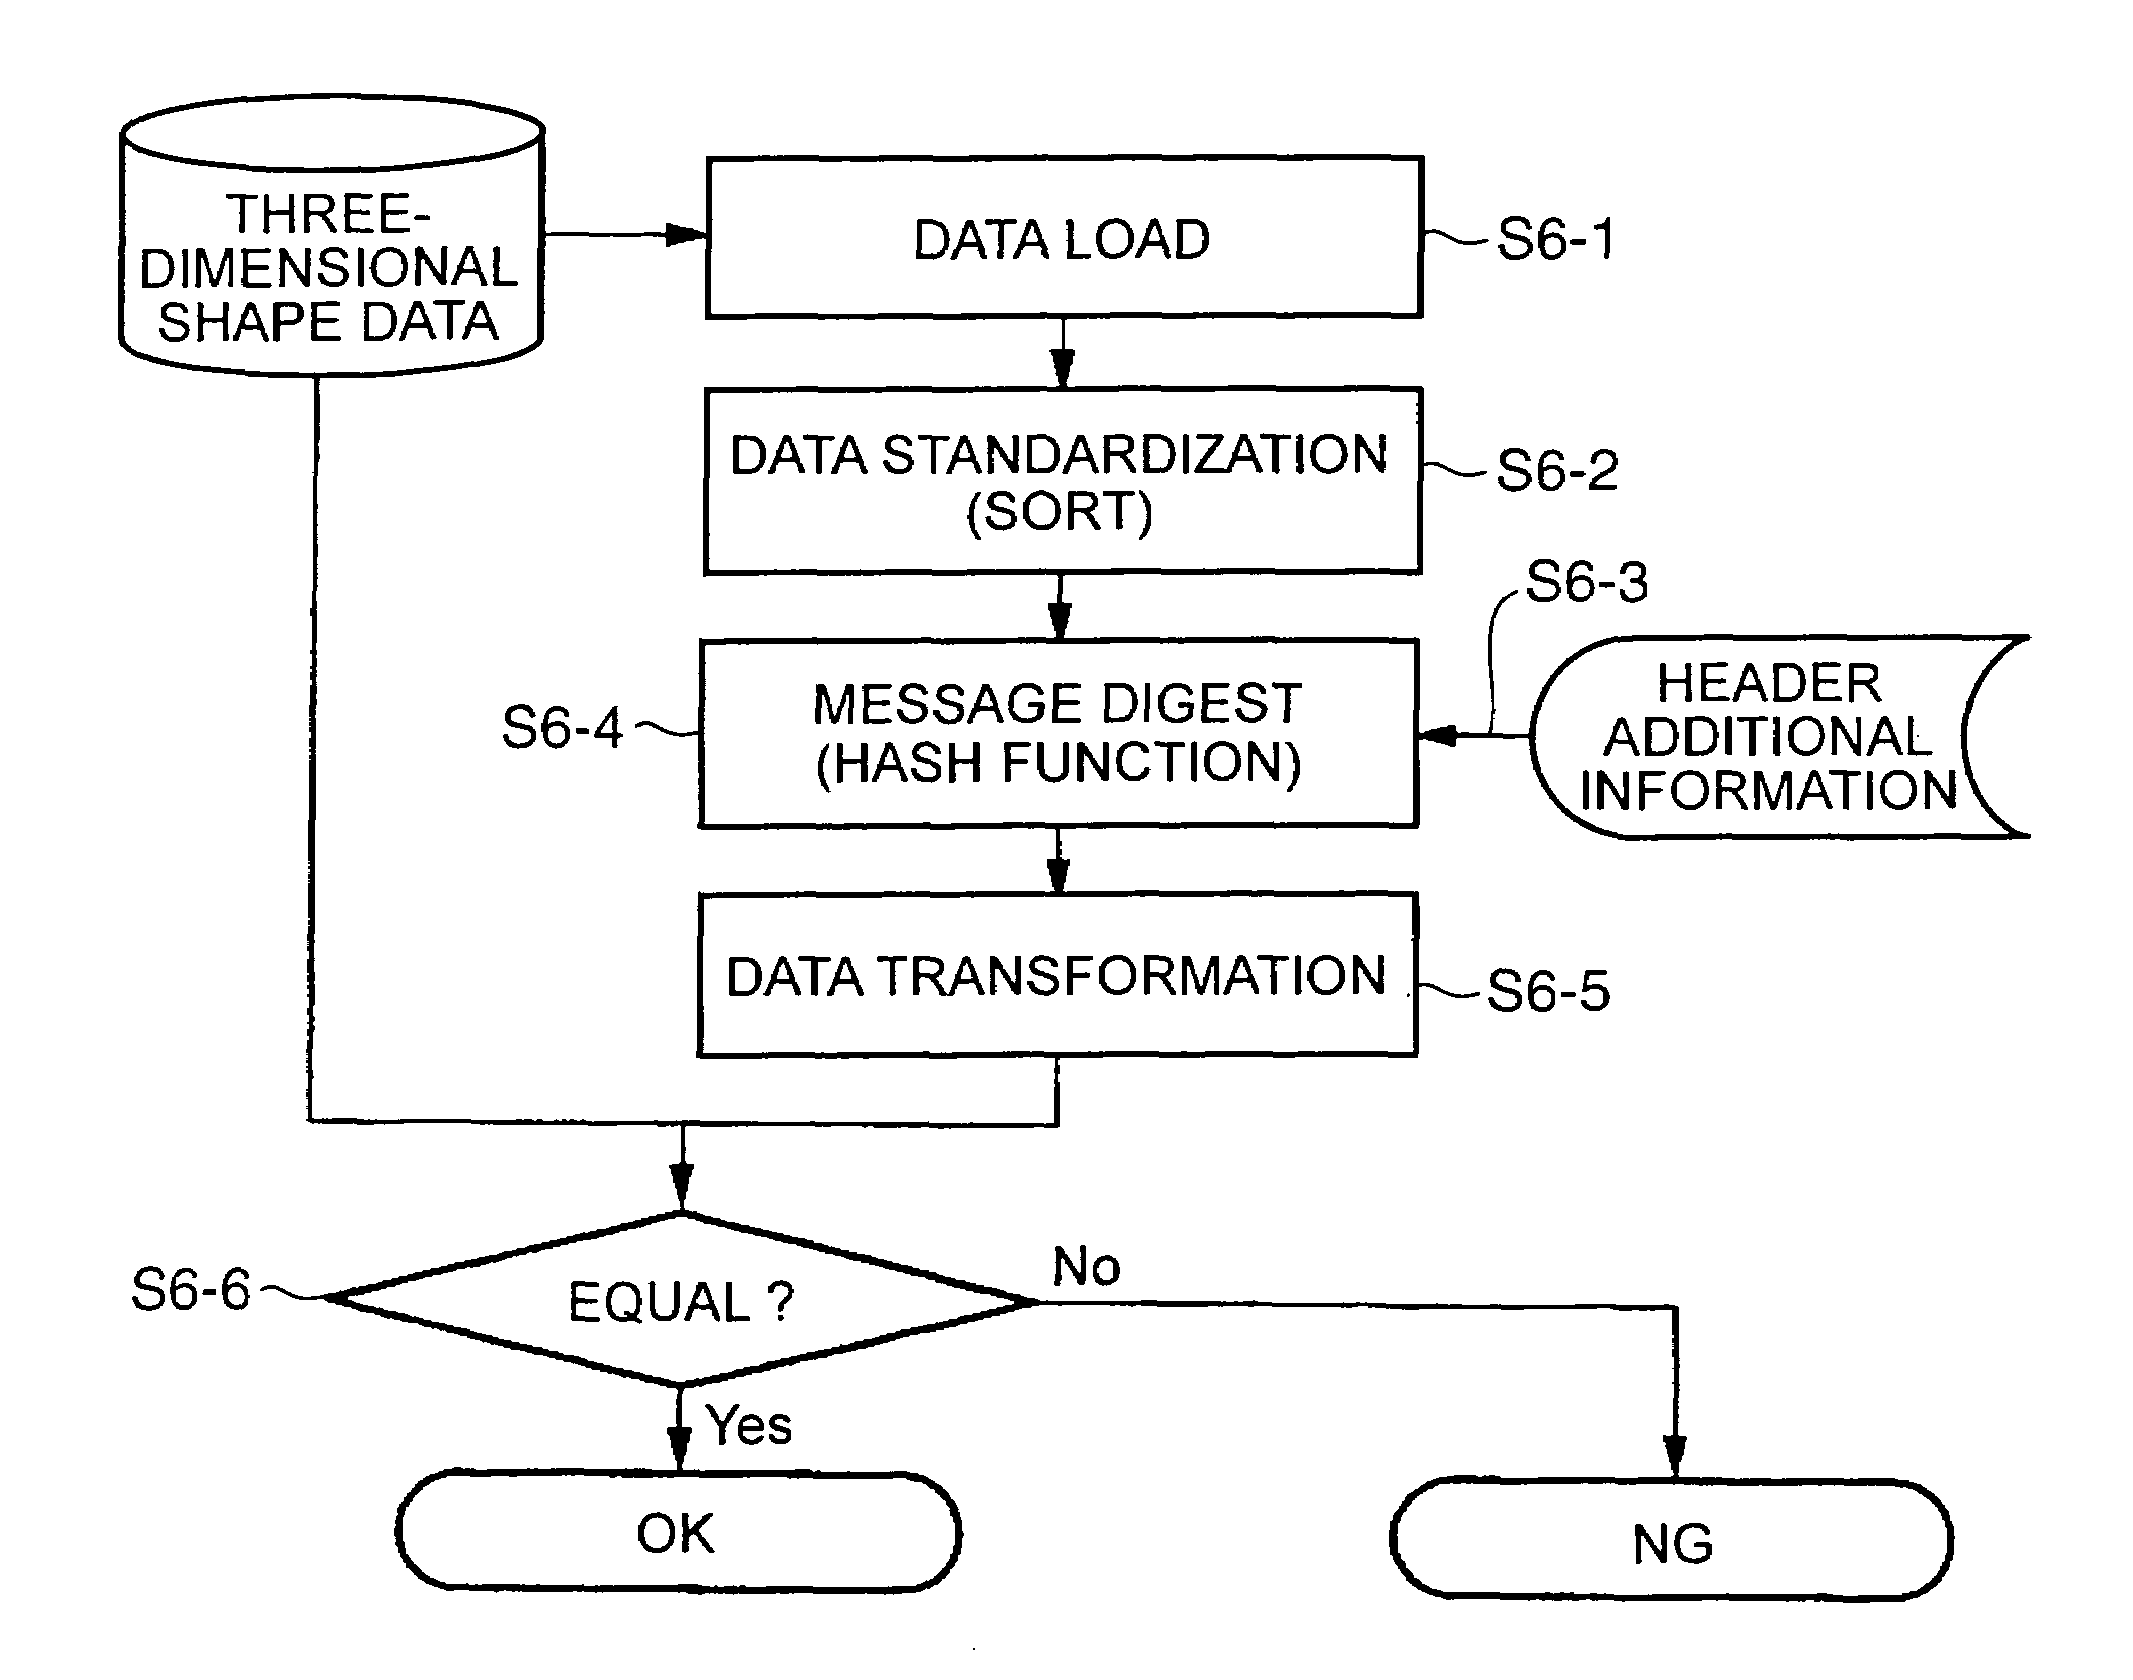 Originality guarantee system, embedded information/alteration detection apparatus and embedded information/alteration detection method, and record medium storing embedded information/alteration detection program therein